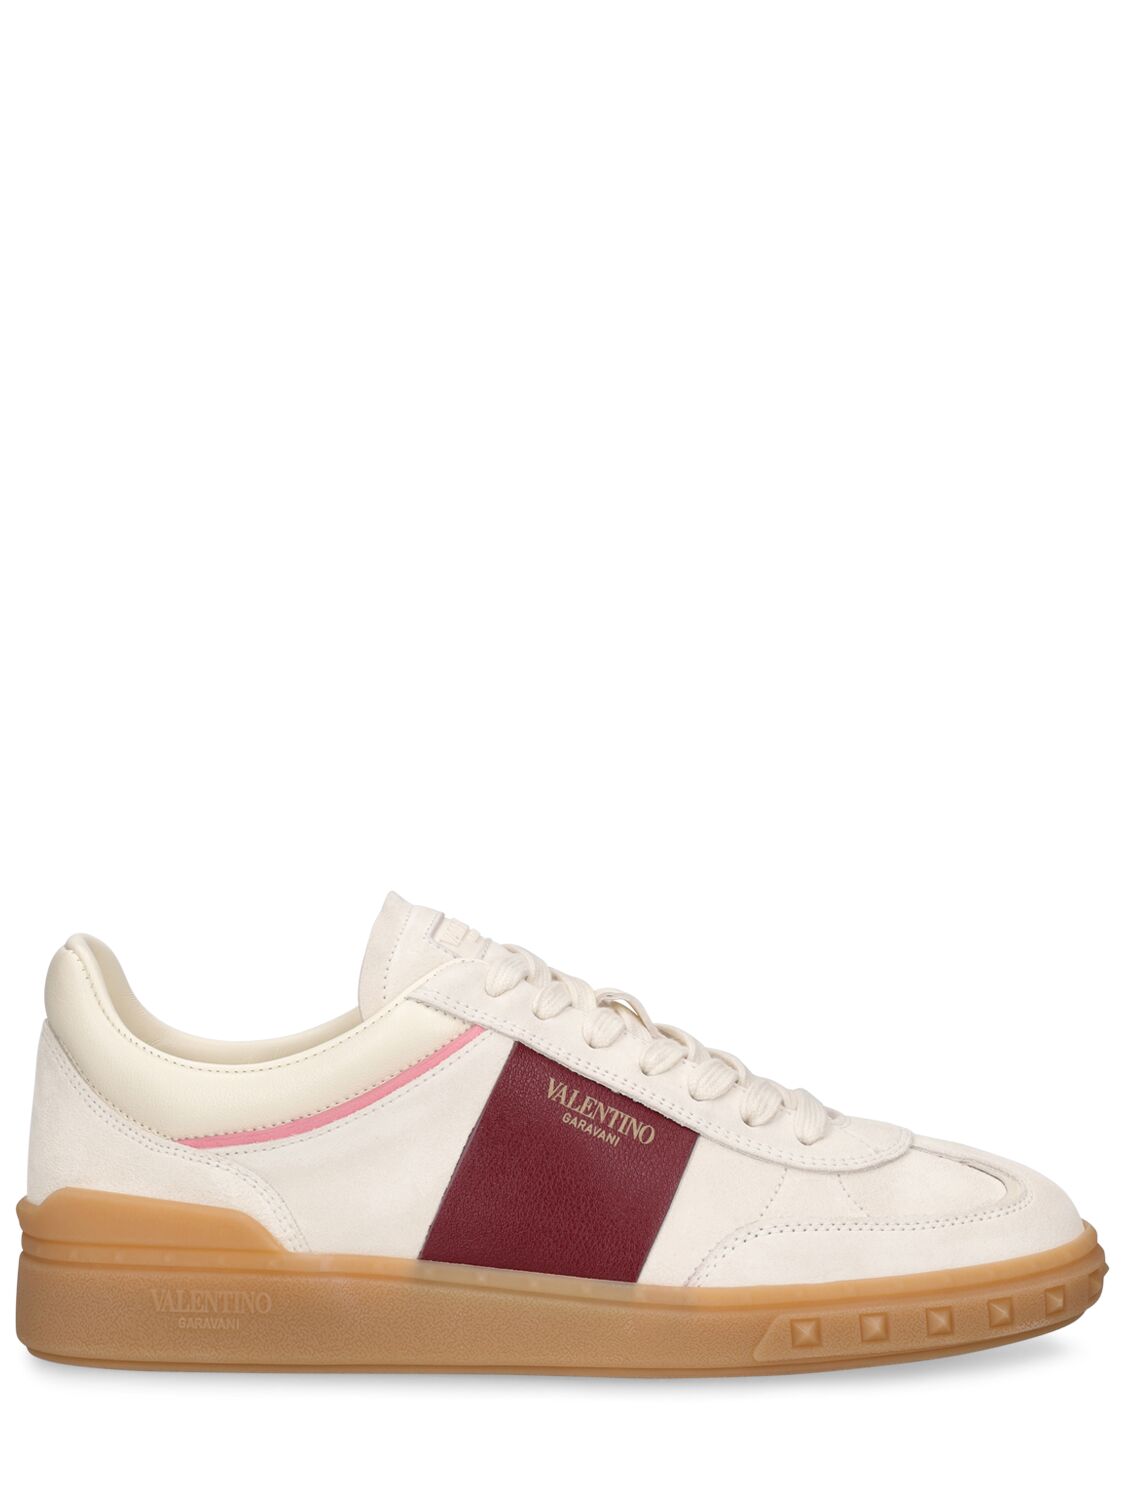 Image of Upvillage Leather Sneakers